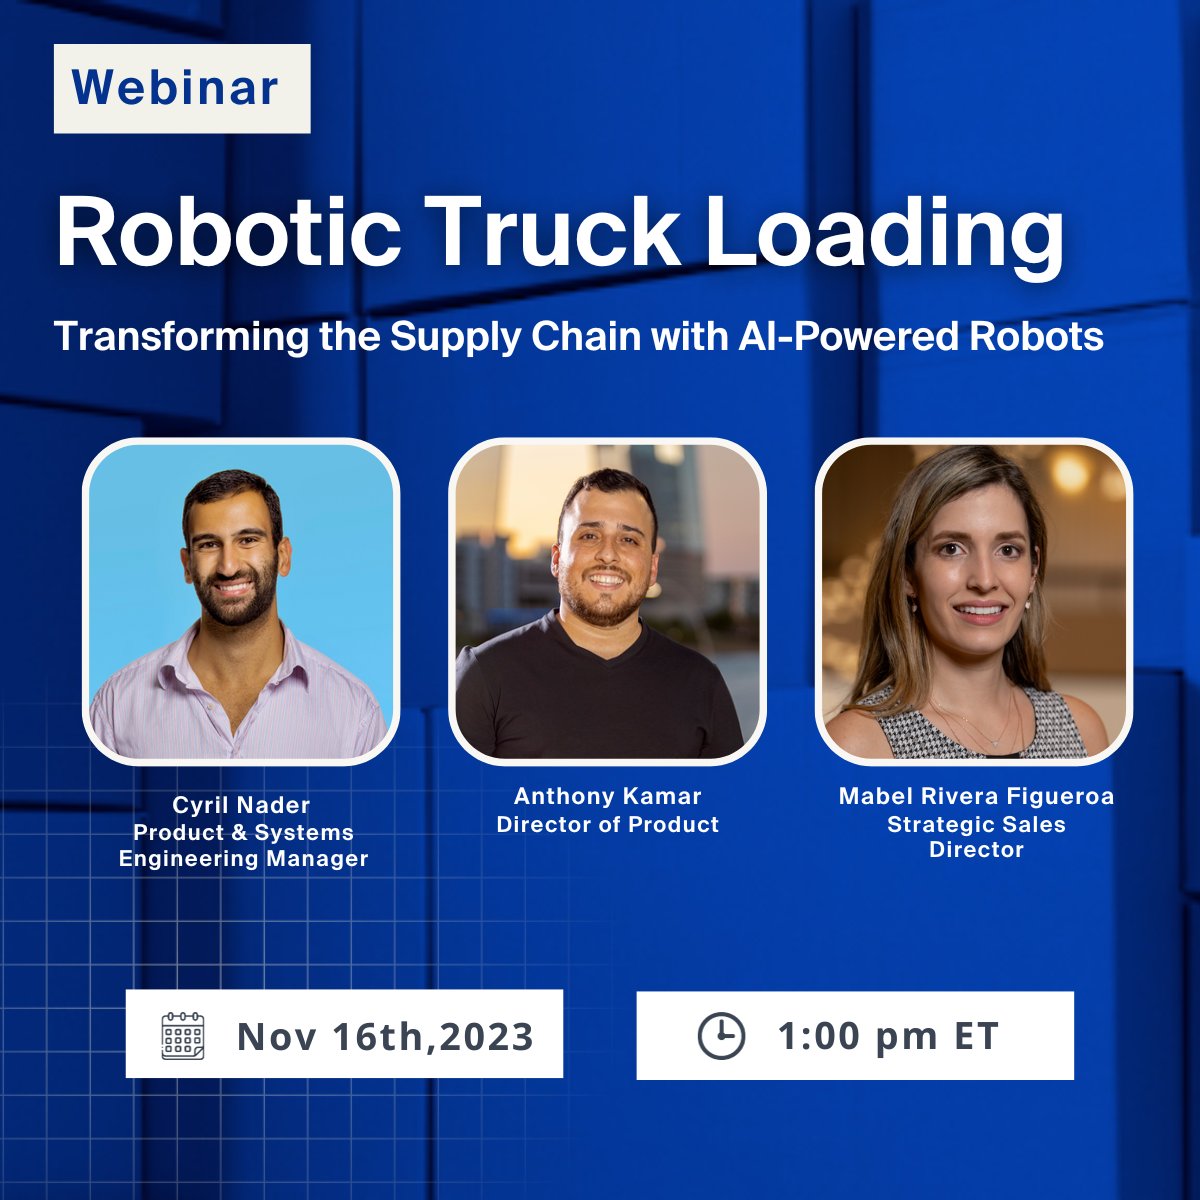 #SaveTheDate: Join @DexterityRobots next week for a #Webinar answering all the burning questions on #DexR – the #AI-powered software @FedEx trusted to tackle one of the most difficult supply chain management tasks 📦 👉 Register 𝐇𝐄𝐑𝐄: okt.to/C8nc9O